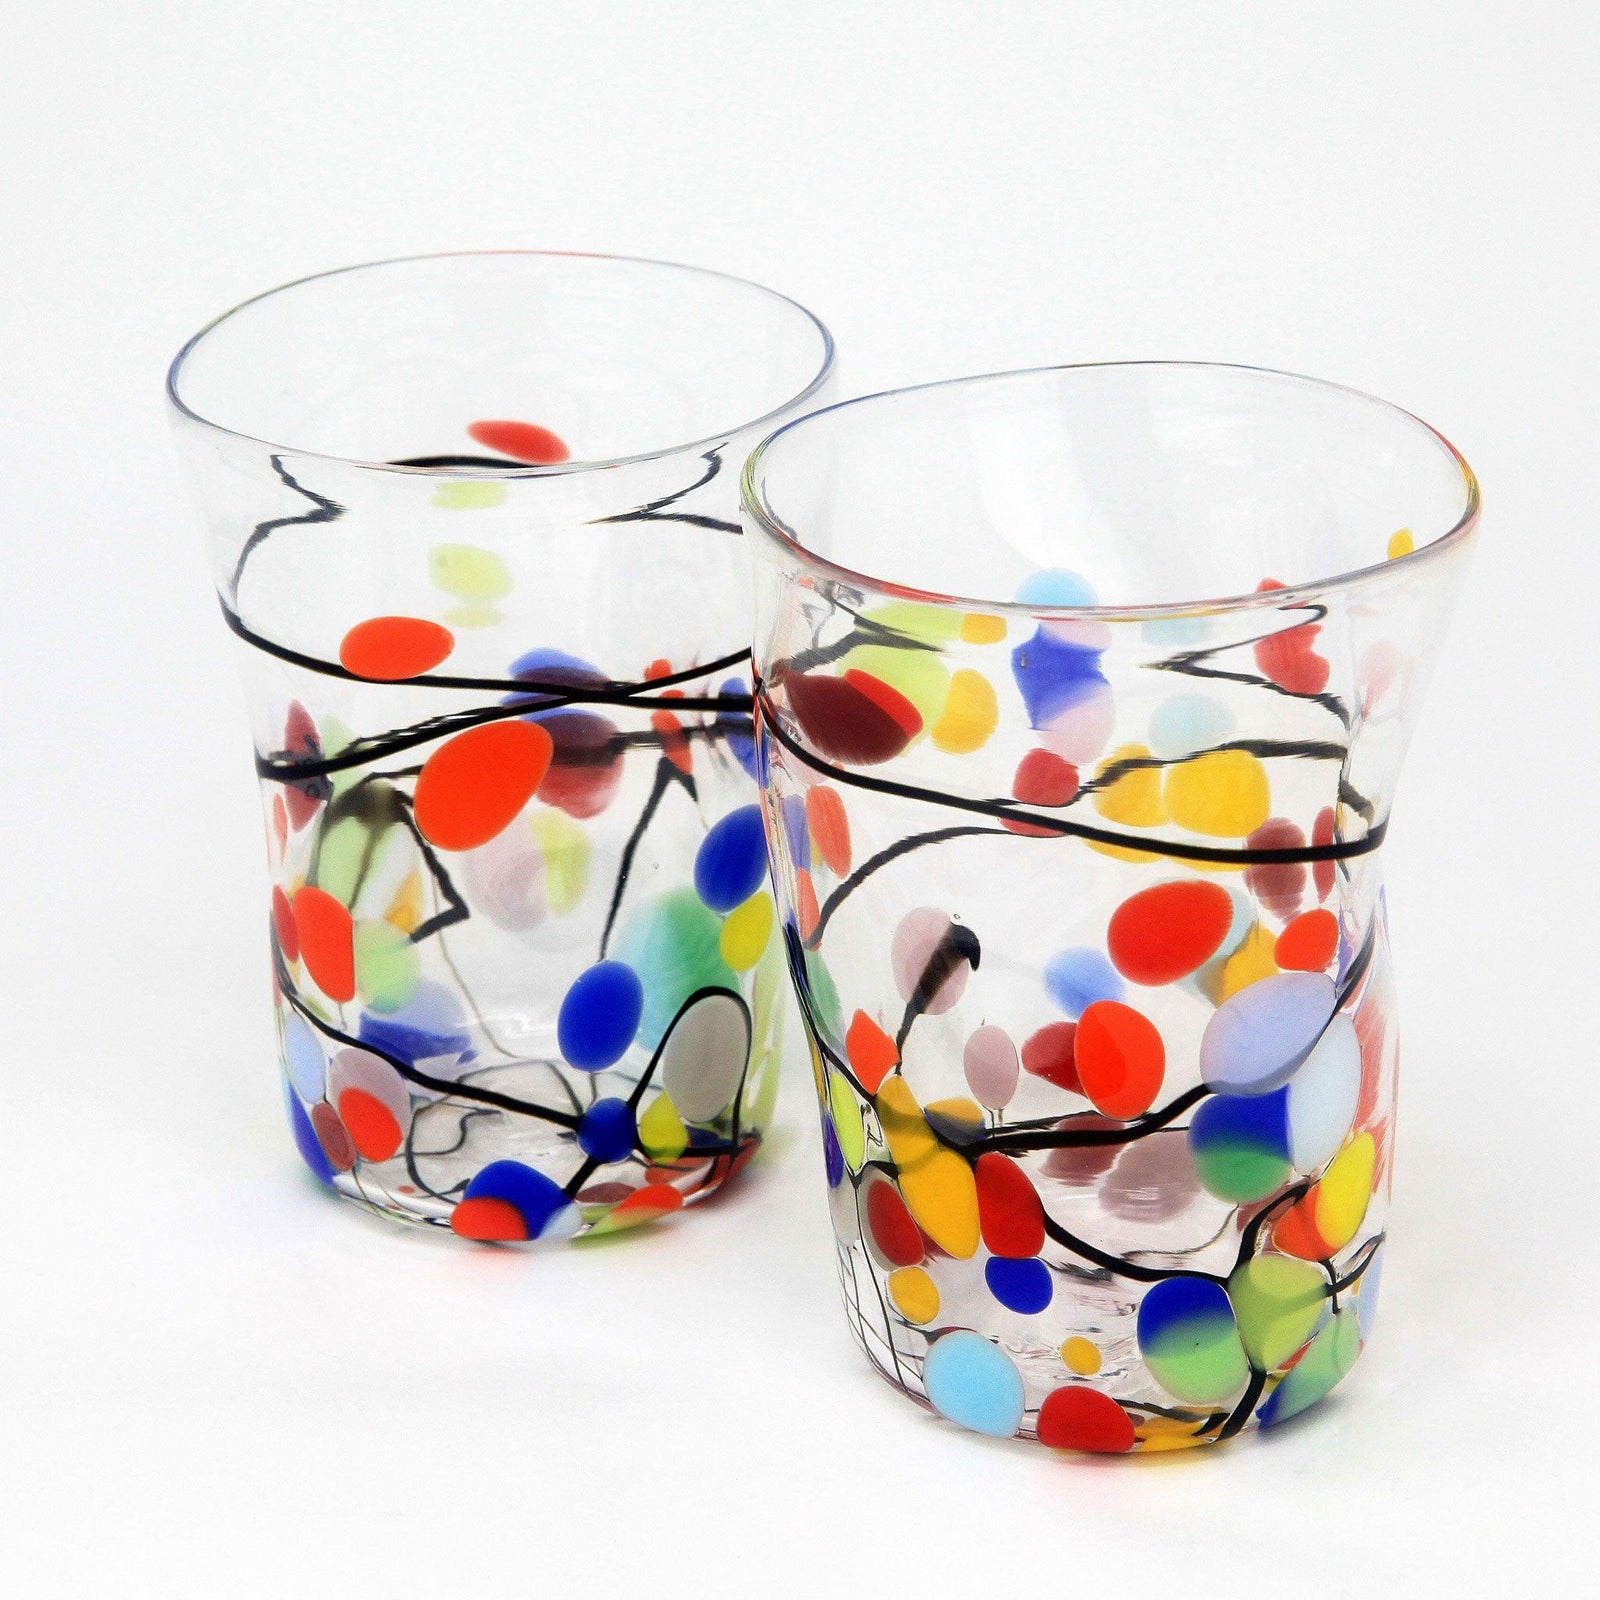 Murano Glass Tumblers, Toscana Drinking Glasses, Made in Italy